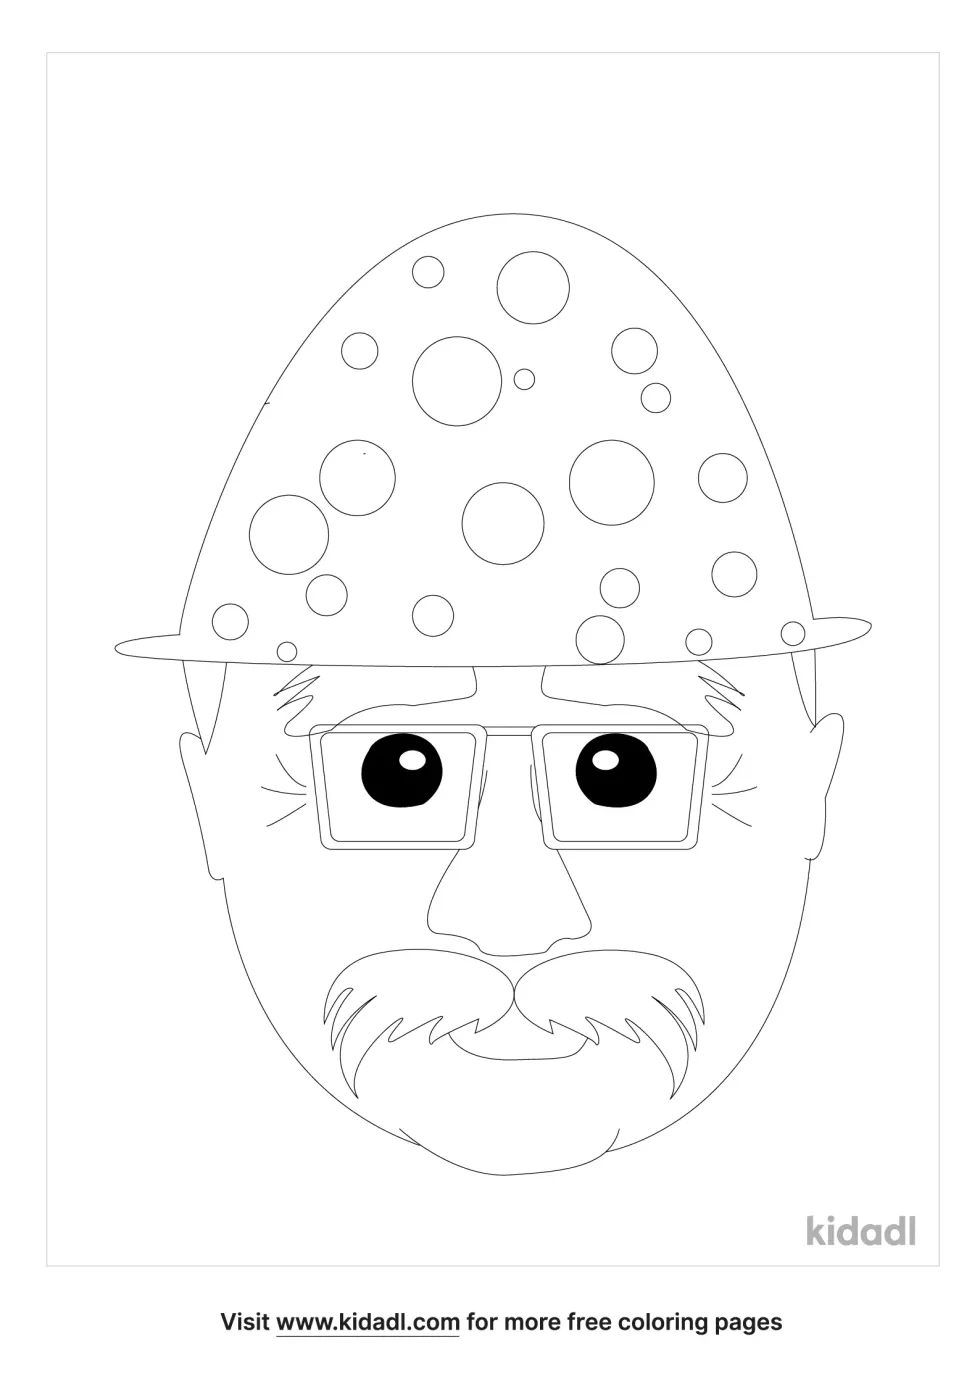 Theodore Rooosevelt Coloring Page